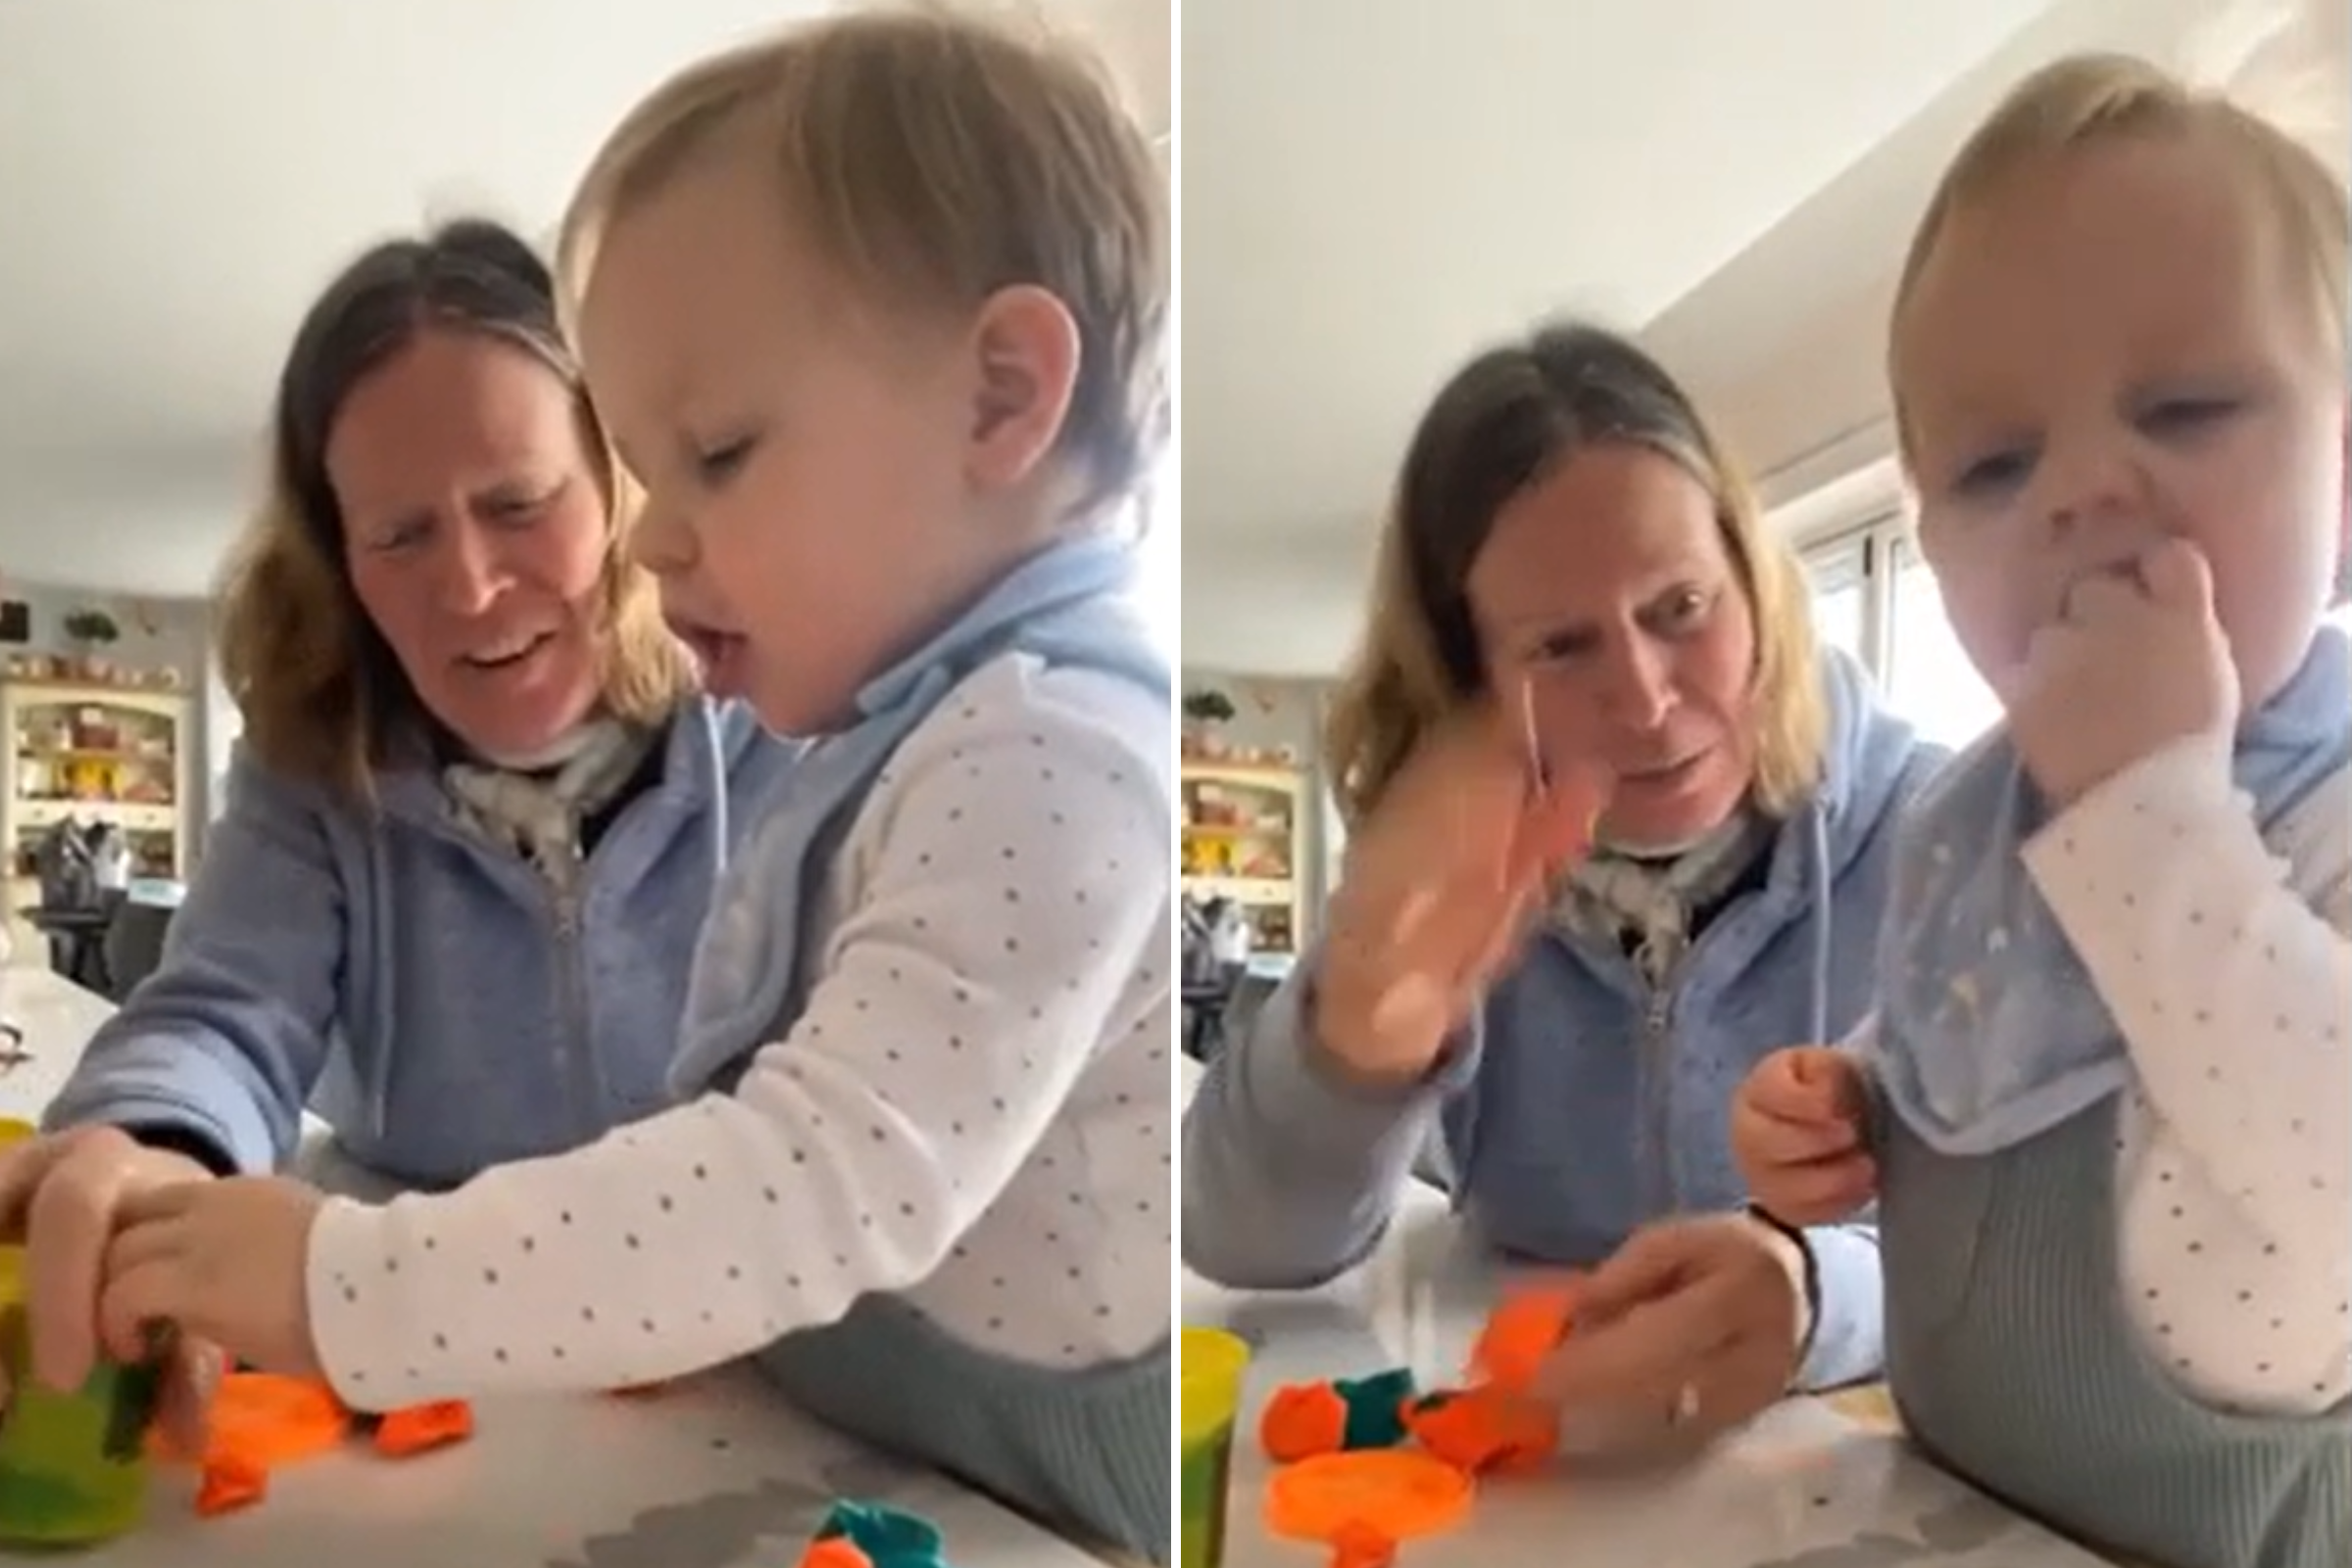 Toddler won’t let grandma stand in way of relentless attempts to eat toy